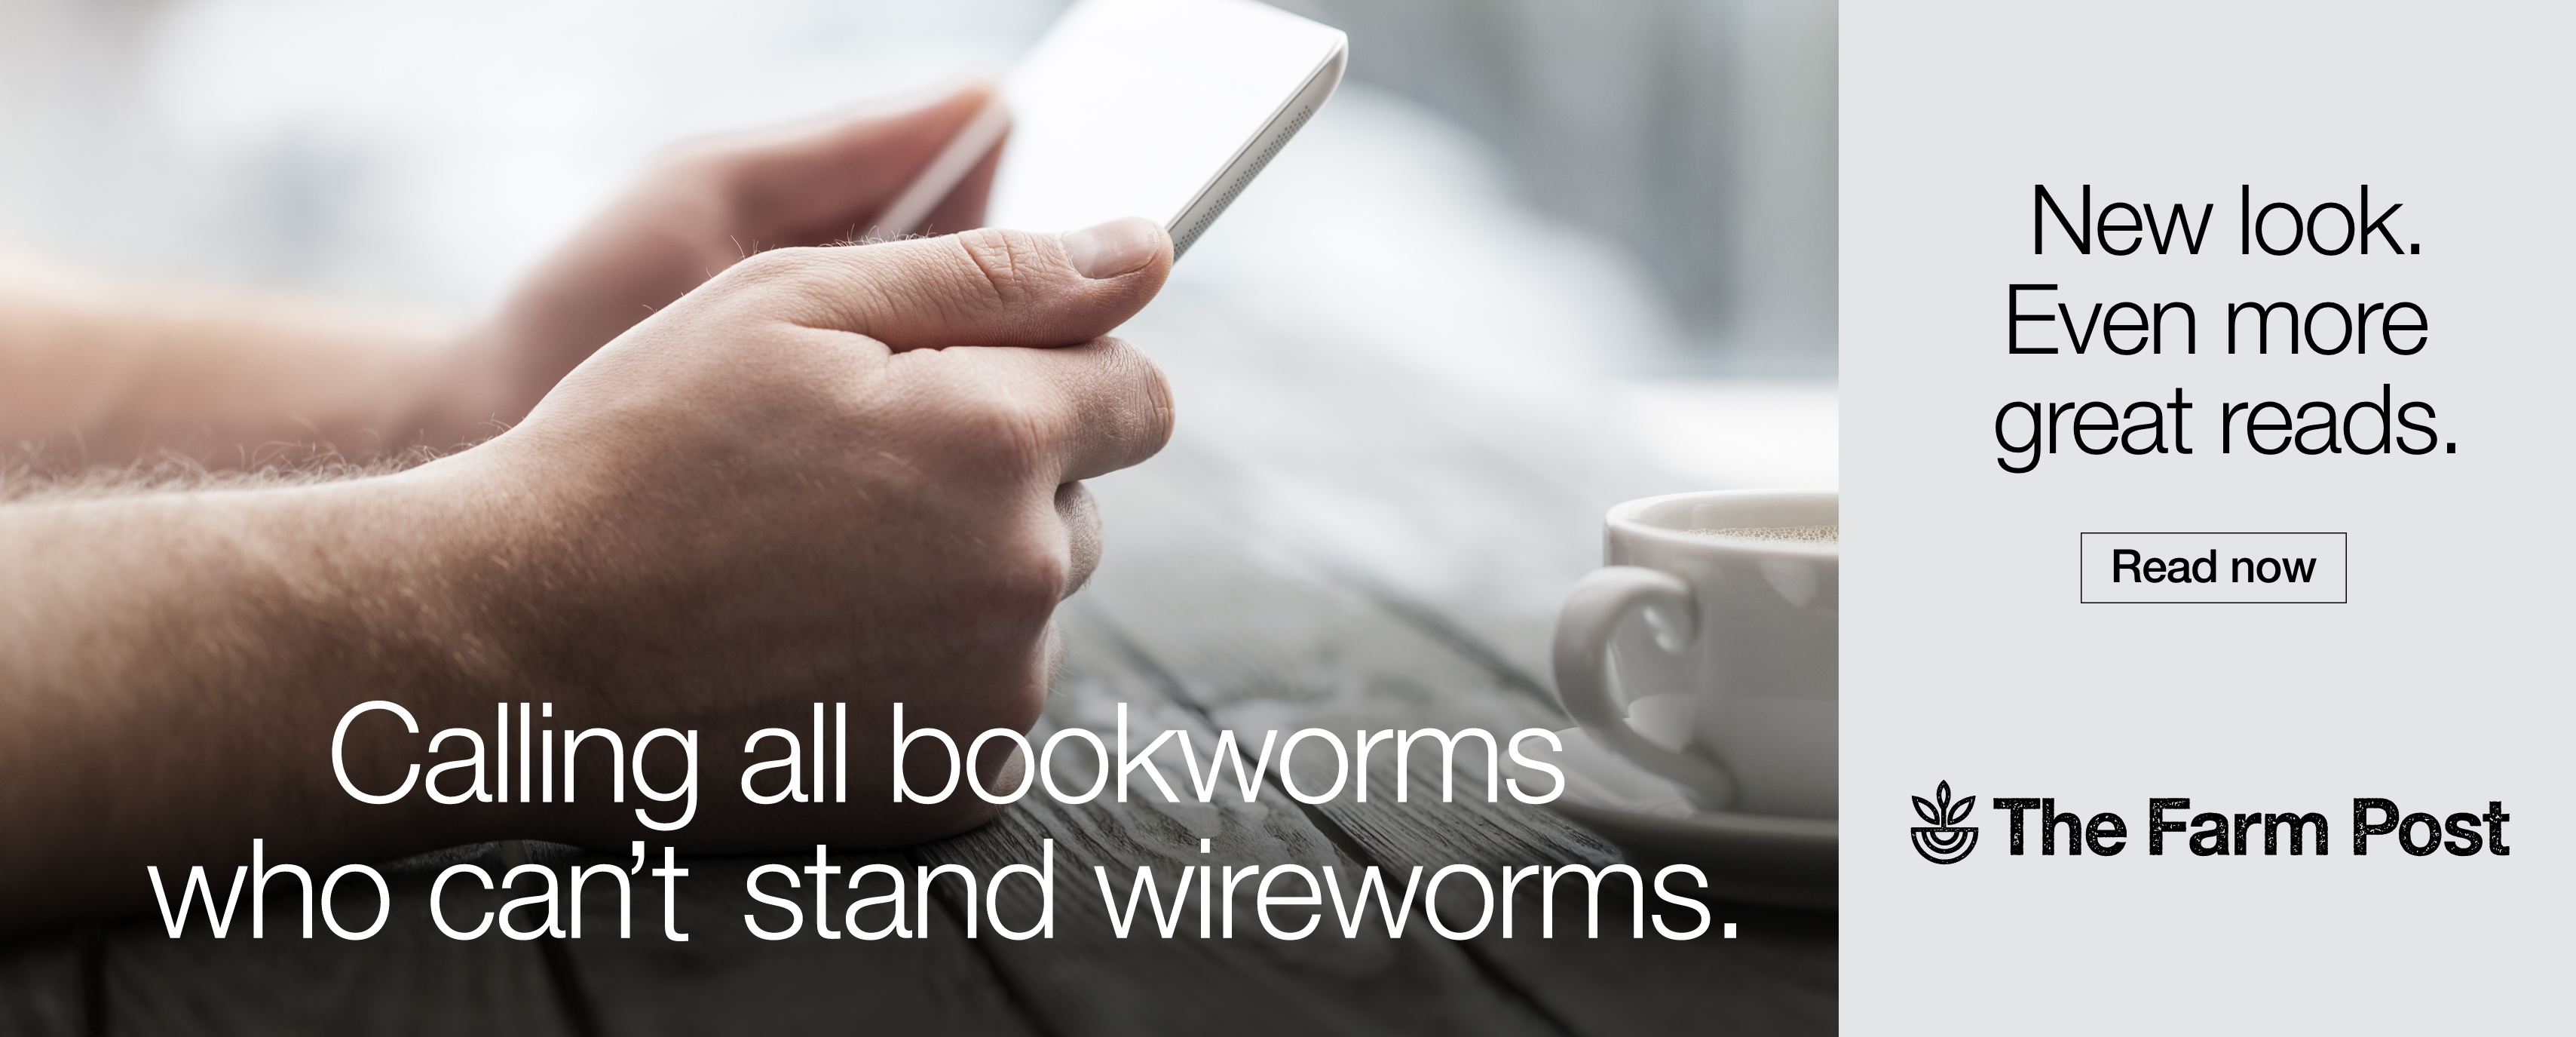 Calling all bookworms who can't stand wireworms